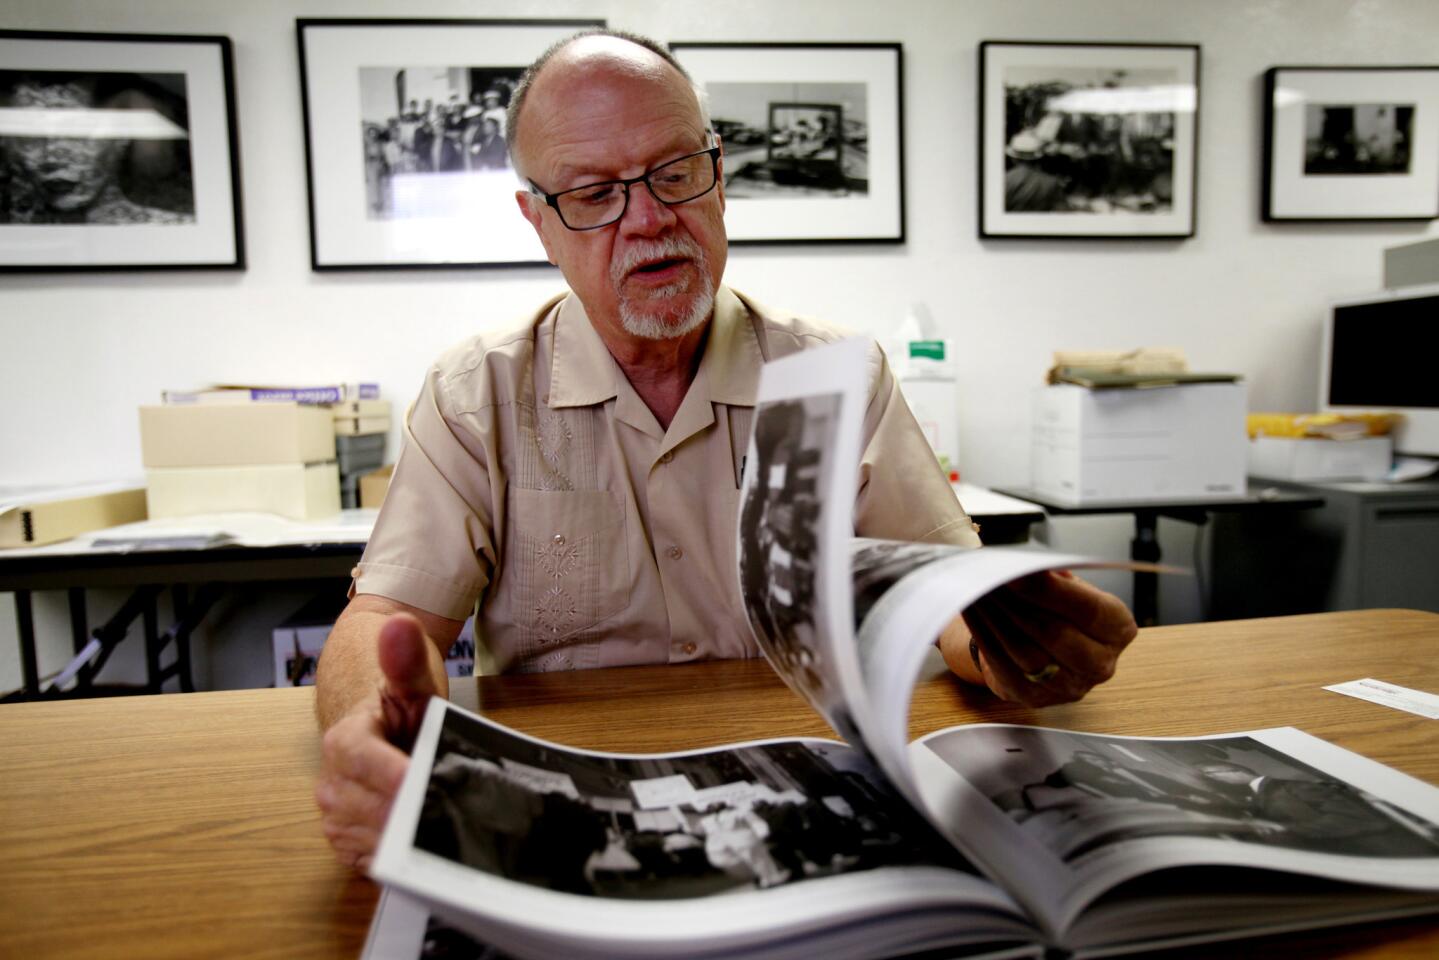 Cal State Northridge journalism professor R. Kent Kirkton leafs through a book spotlighting African American photography as he speaks with reporters on campus.